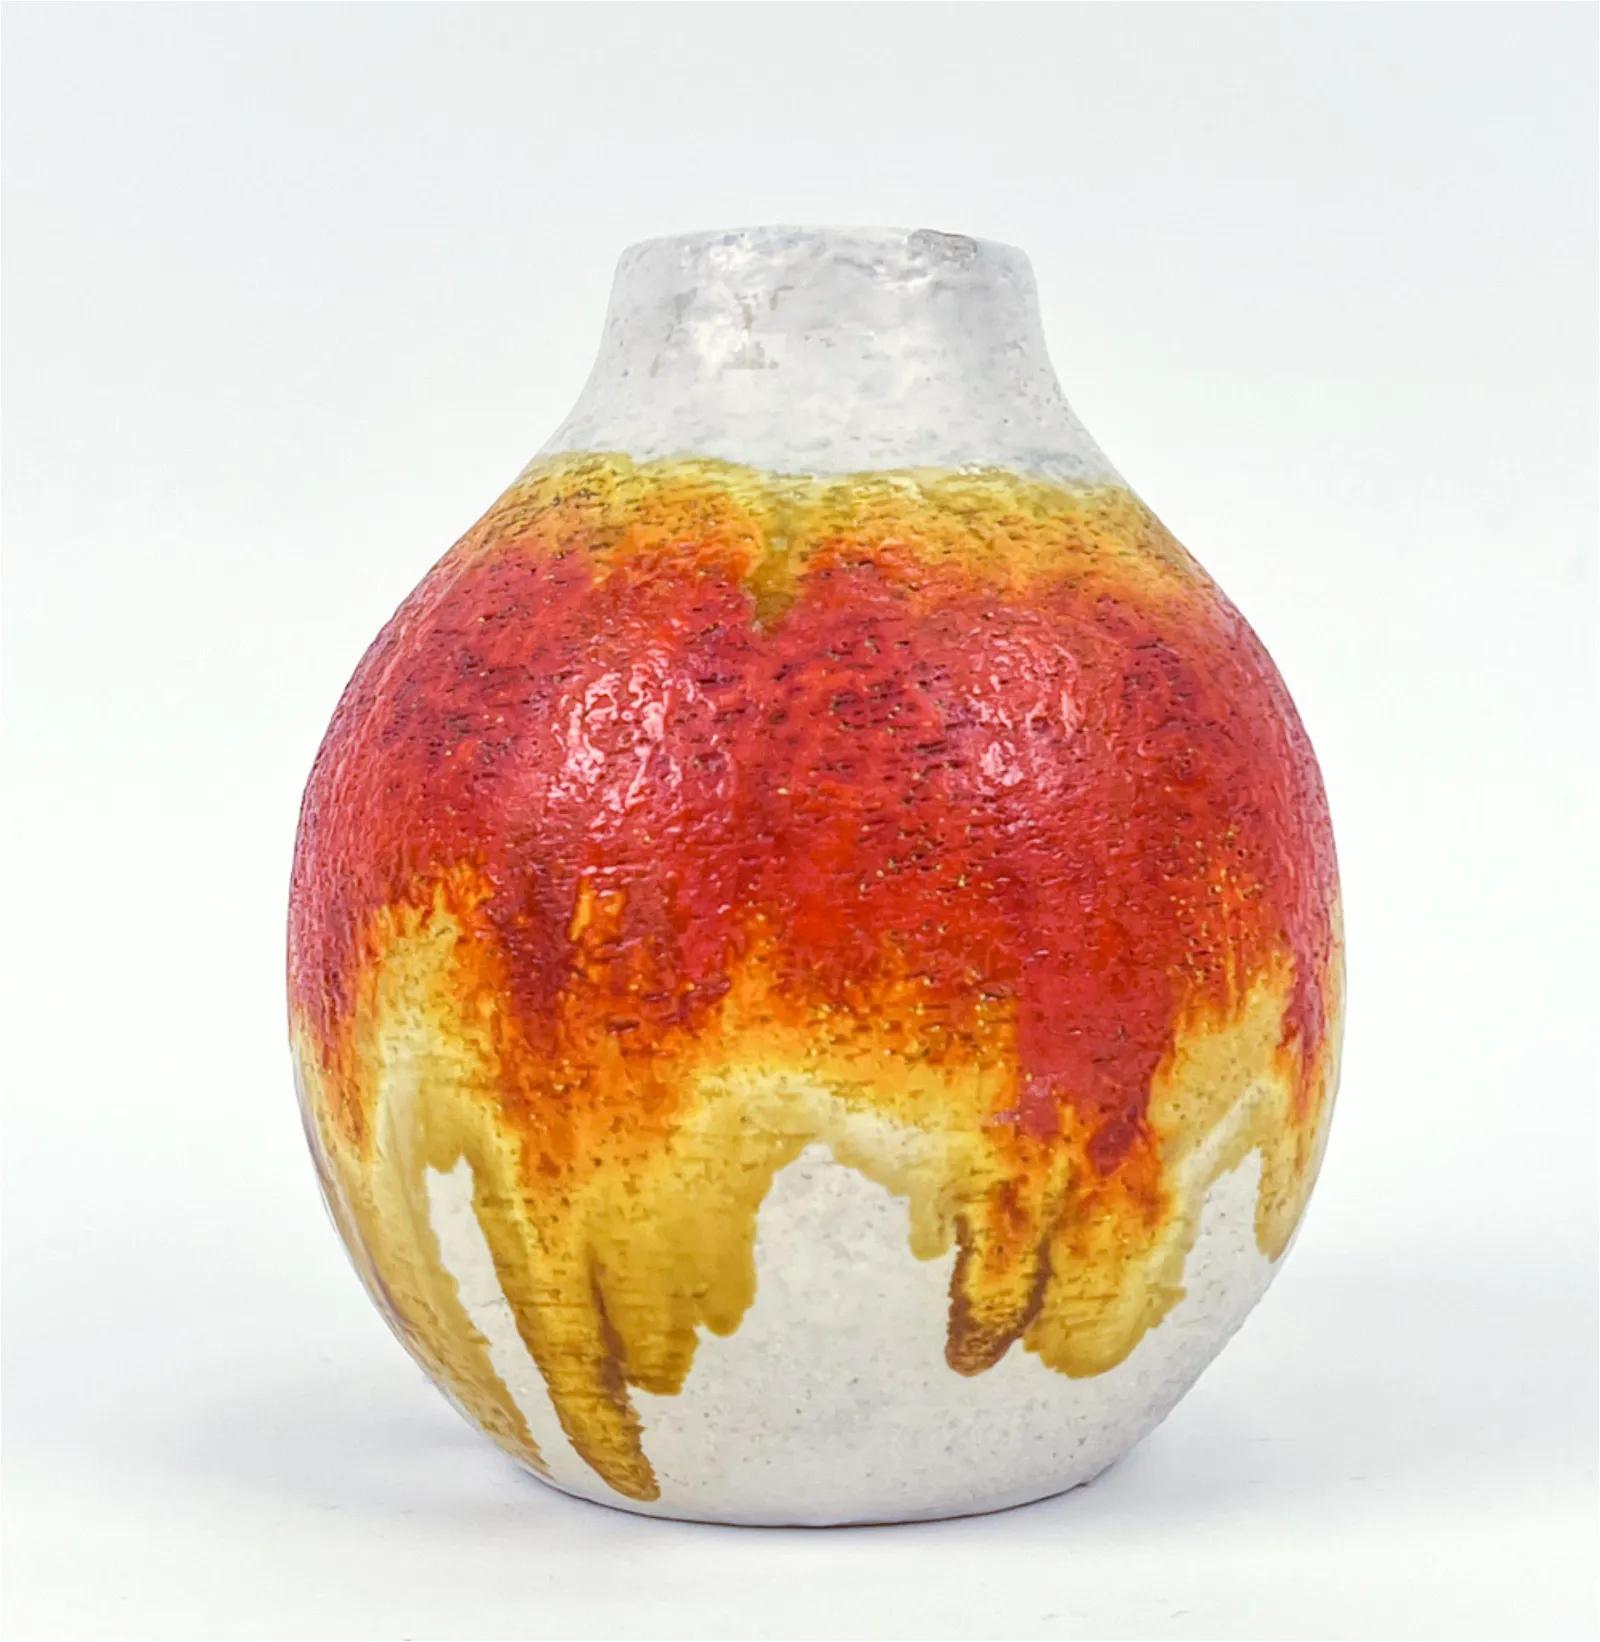 Signed underneath: Fantoni, Italy. In red, white, and yellow glaze. Dimensions: H 7